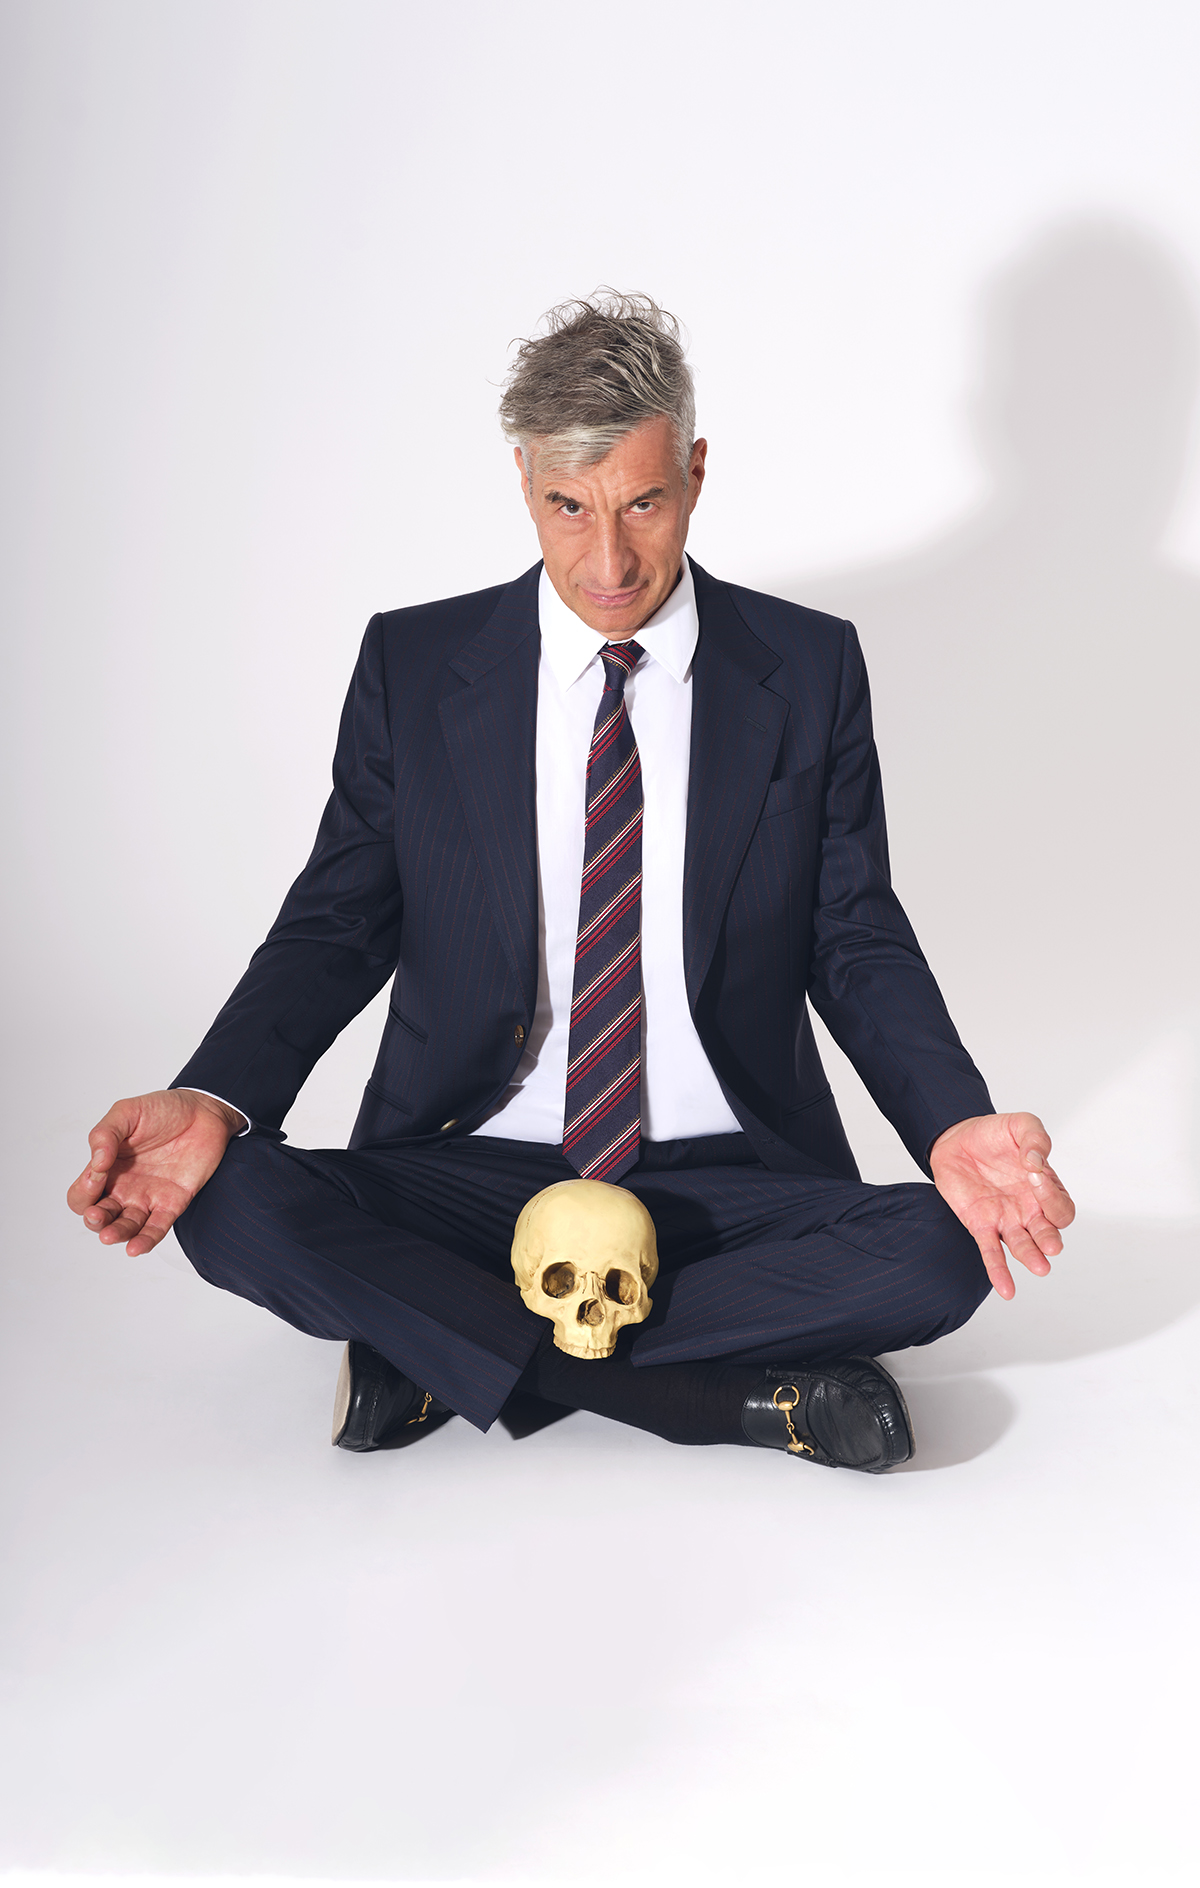 A man sitting cross legged with a skull in his lap wearing a suit